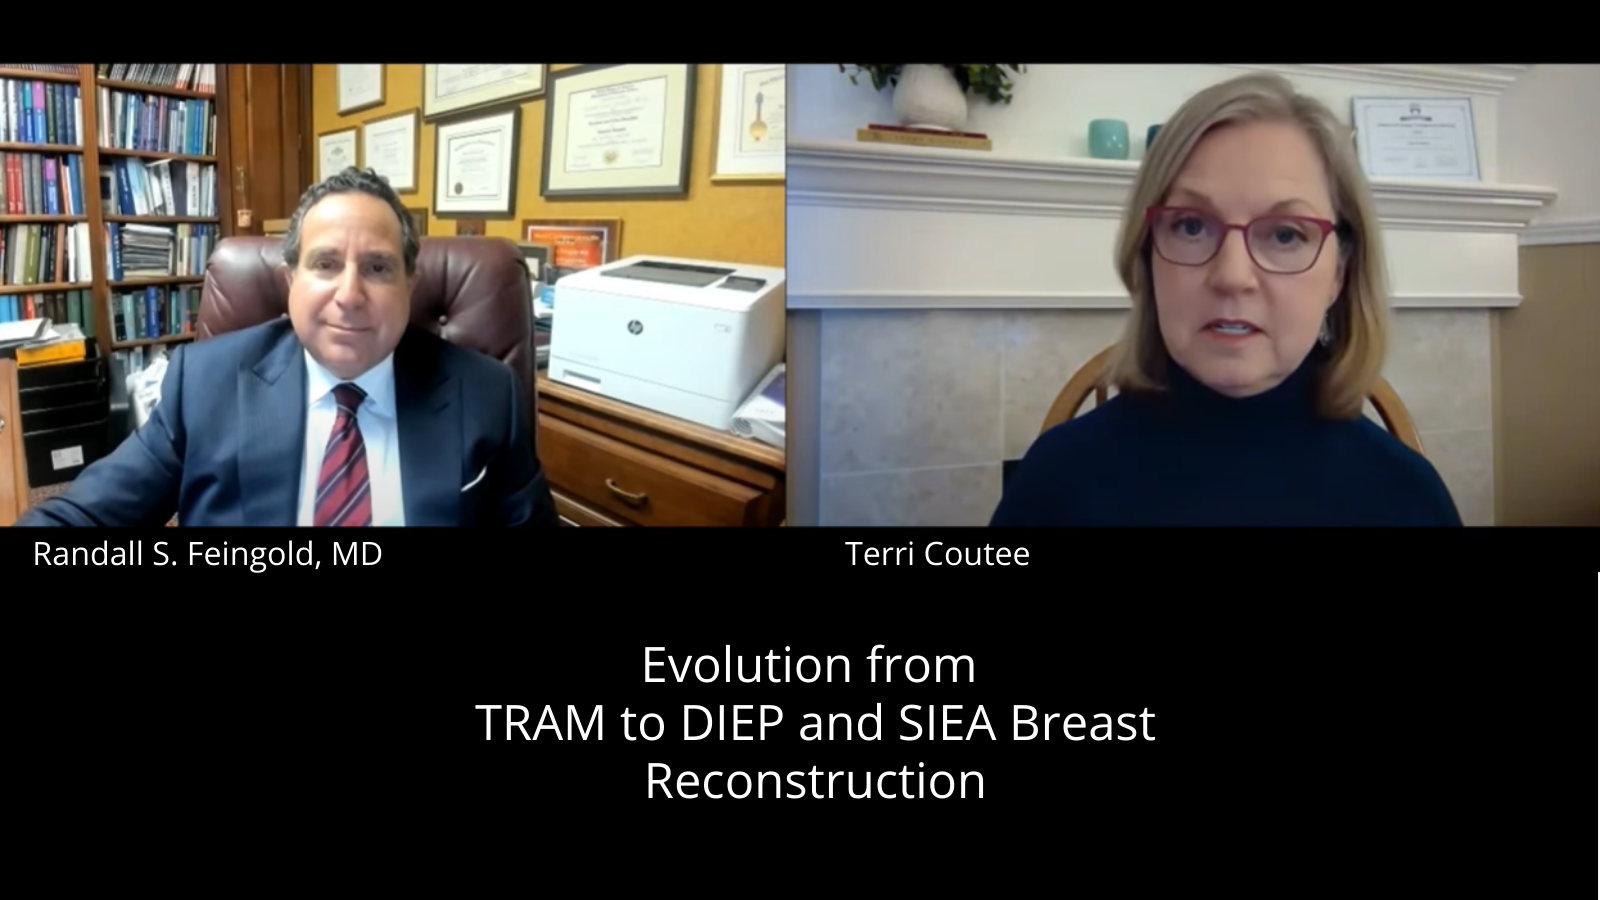 Dr. Feingold and Terri Coutee discuss evolution from TRAM to DIEP and SIEA Breast Reconstruction